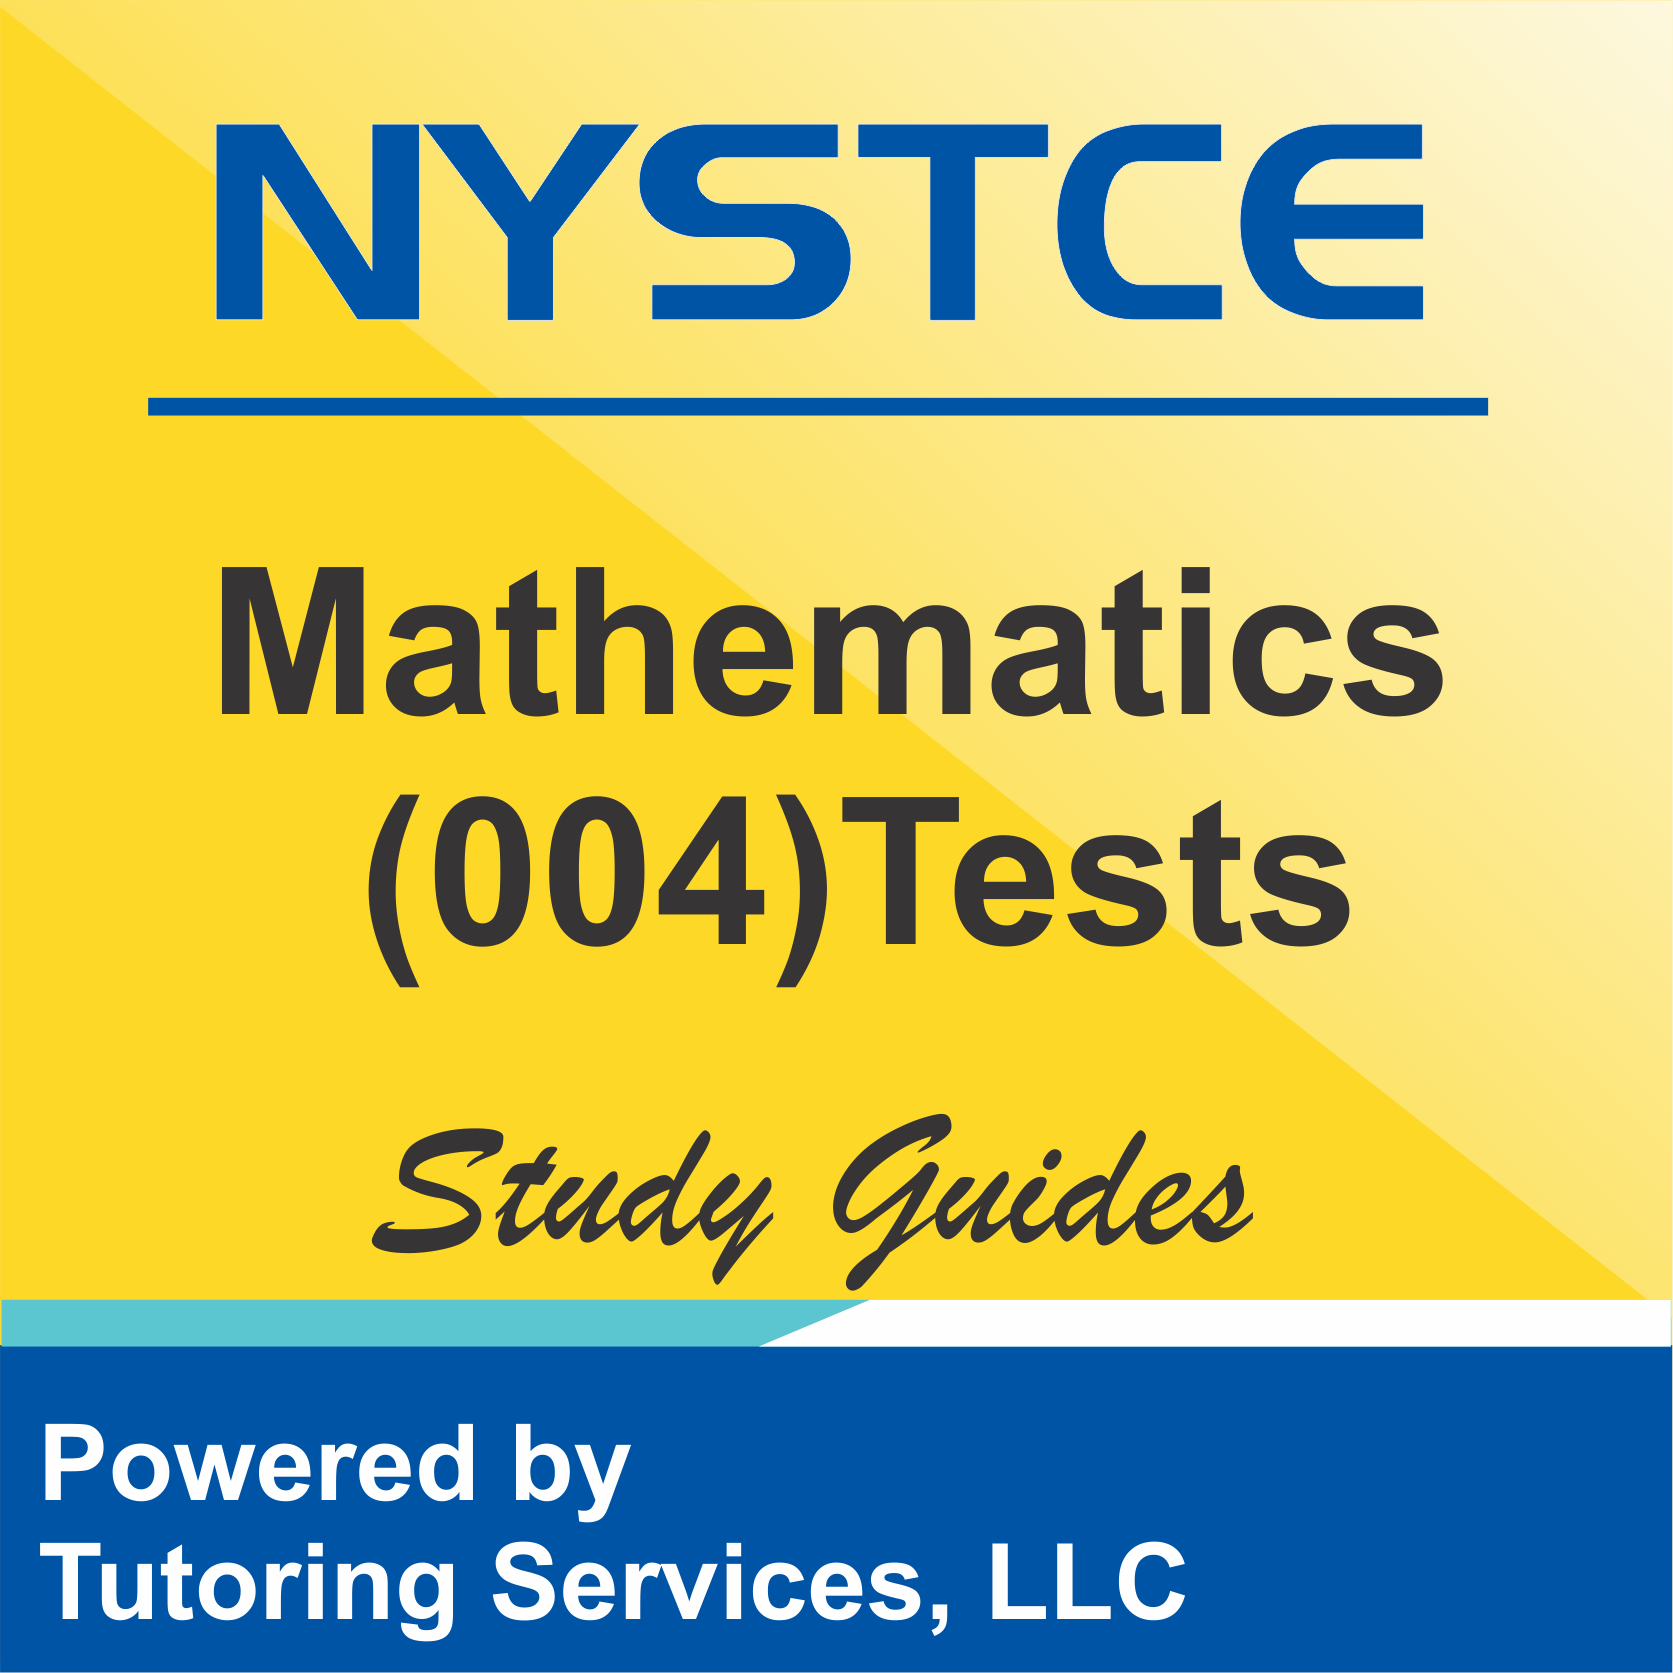 NYSTCE New York Licensure Test Facts for Mathematics 004